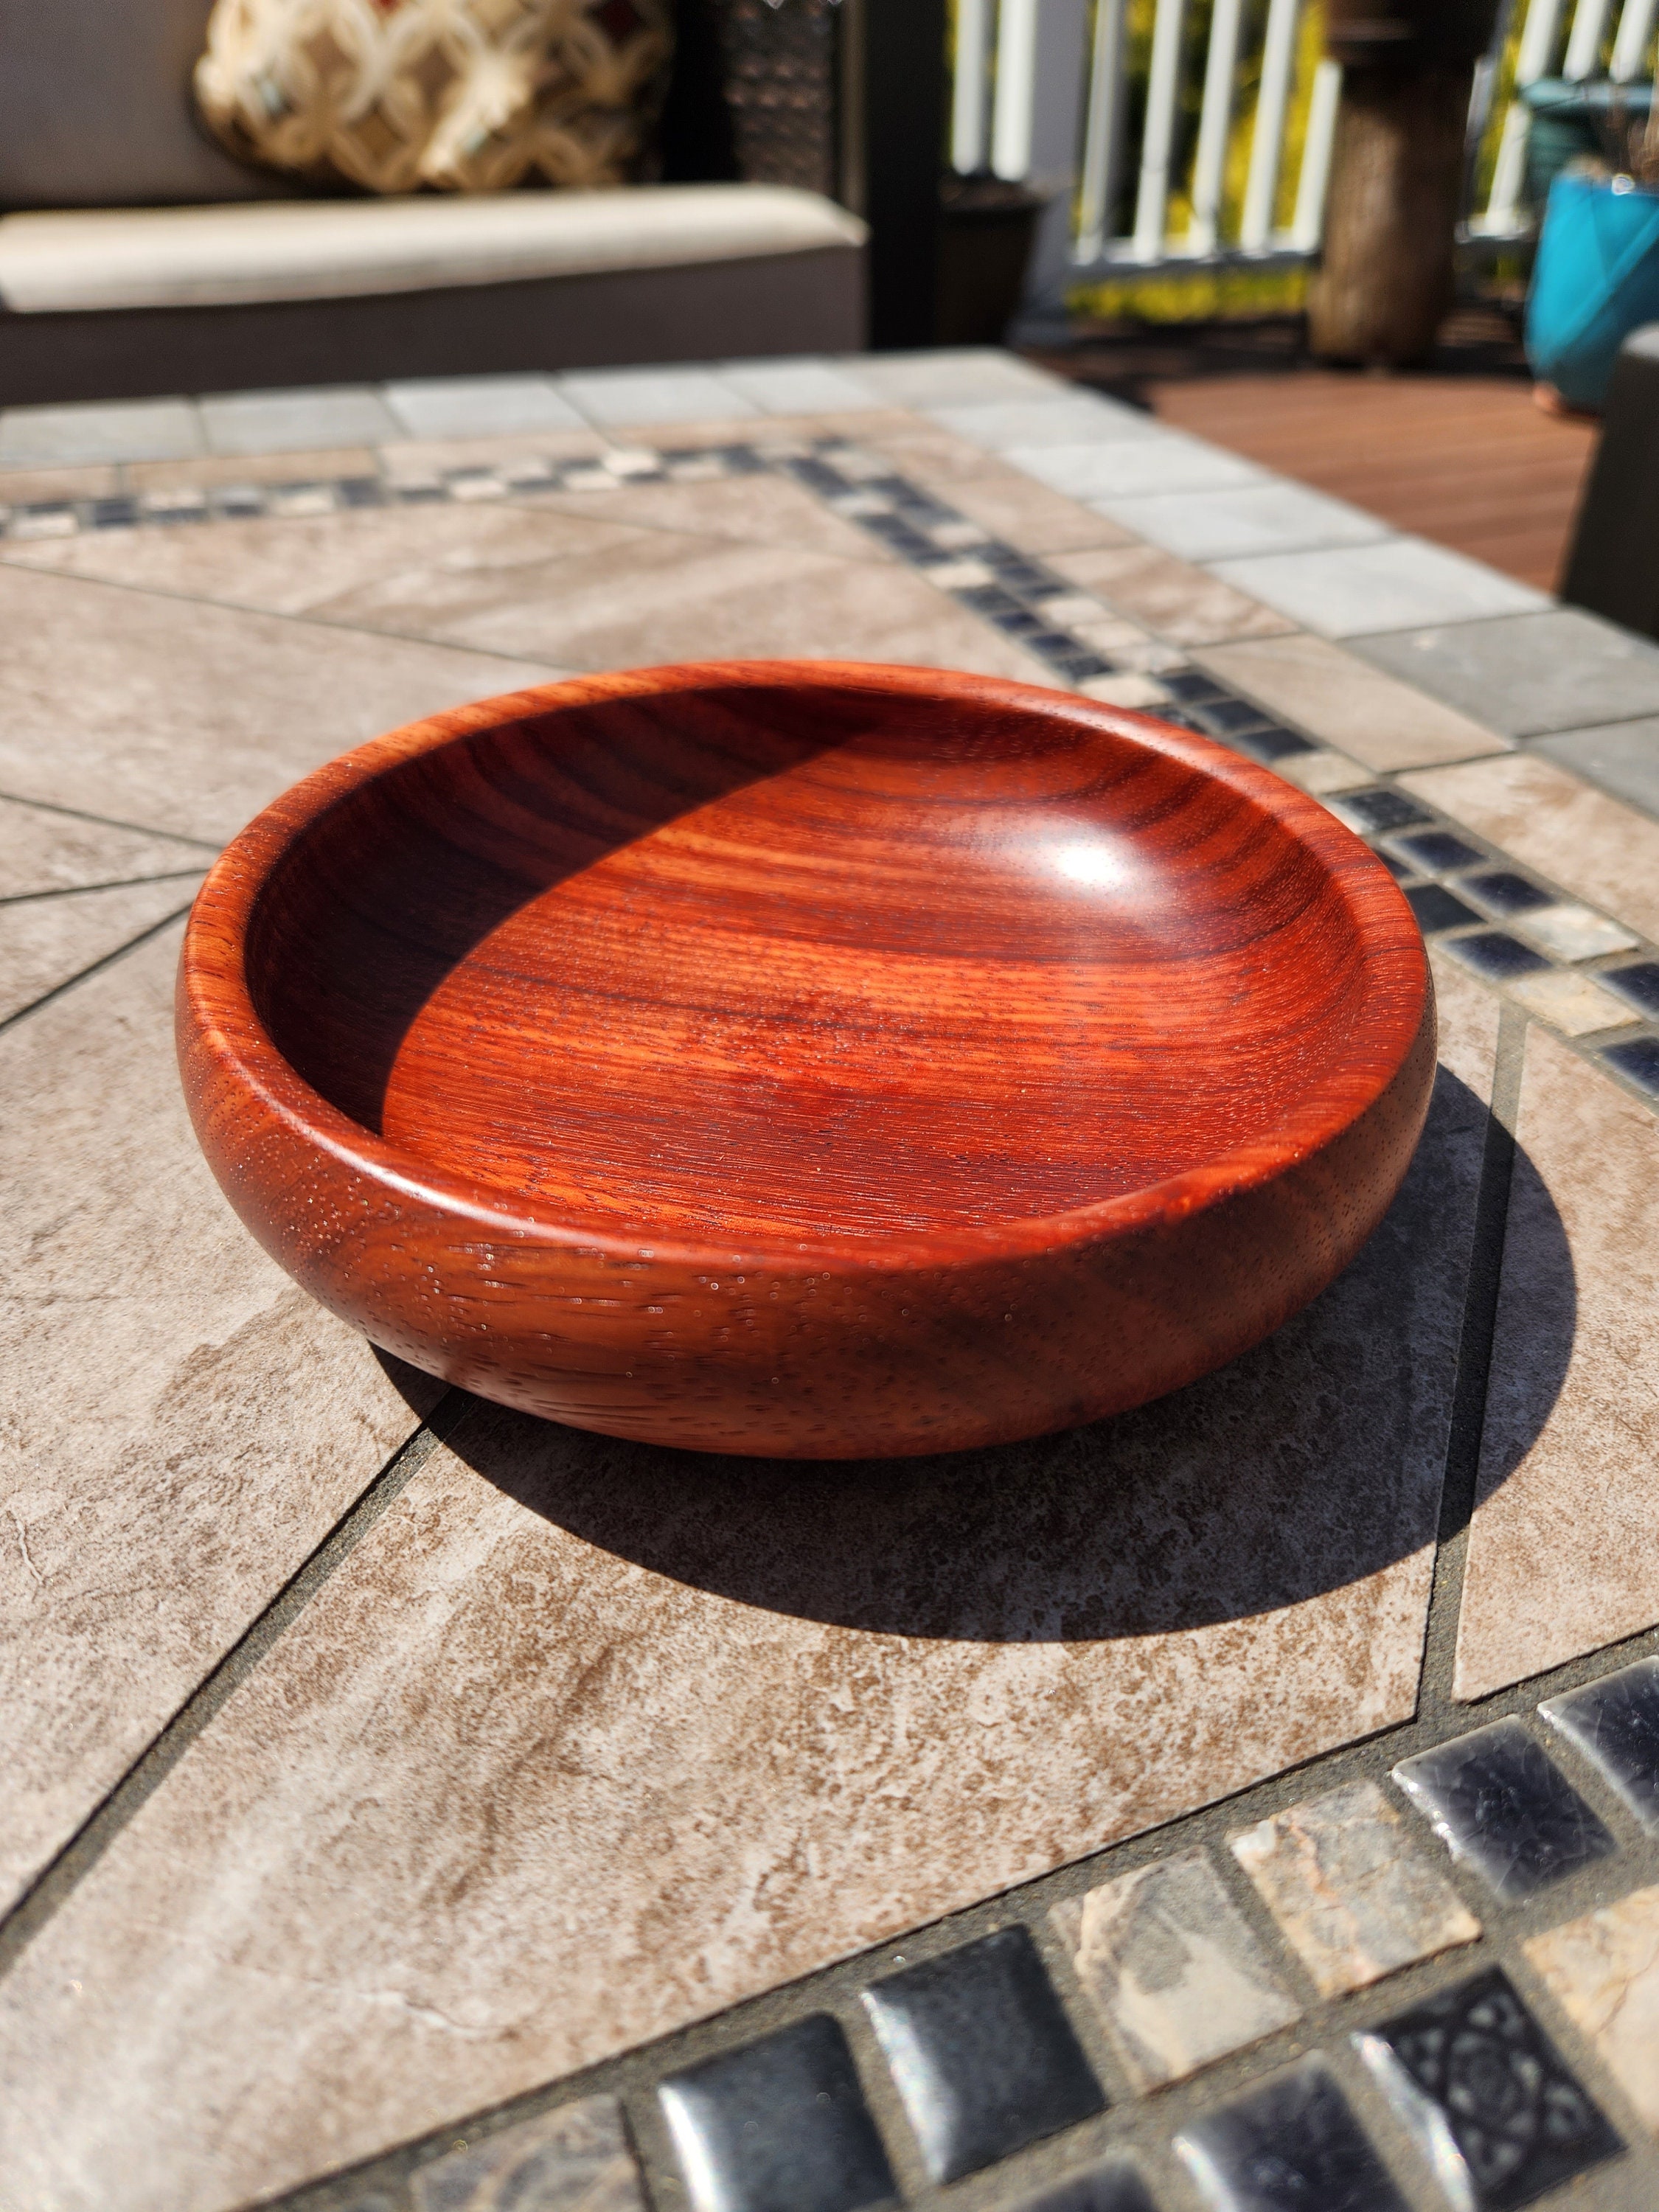 How To: Revive Old Wood with Boiled Linseed Oil - The Craftsman Blog